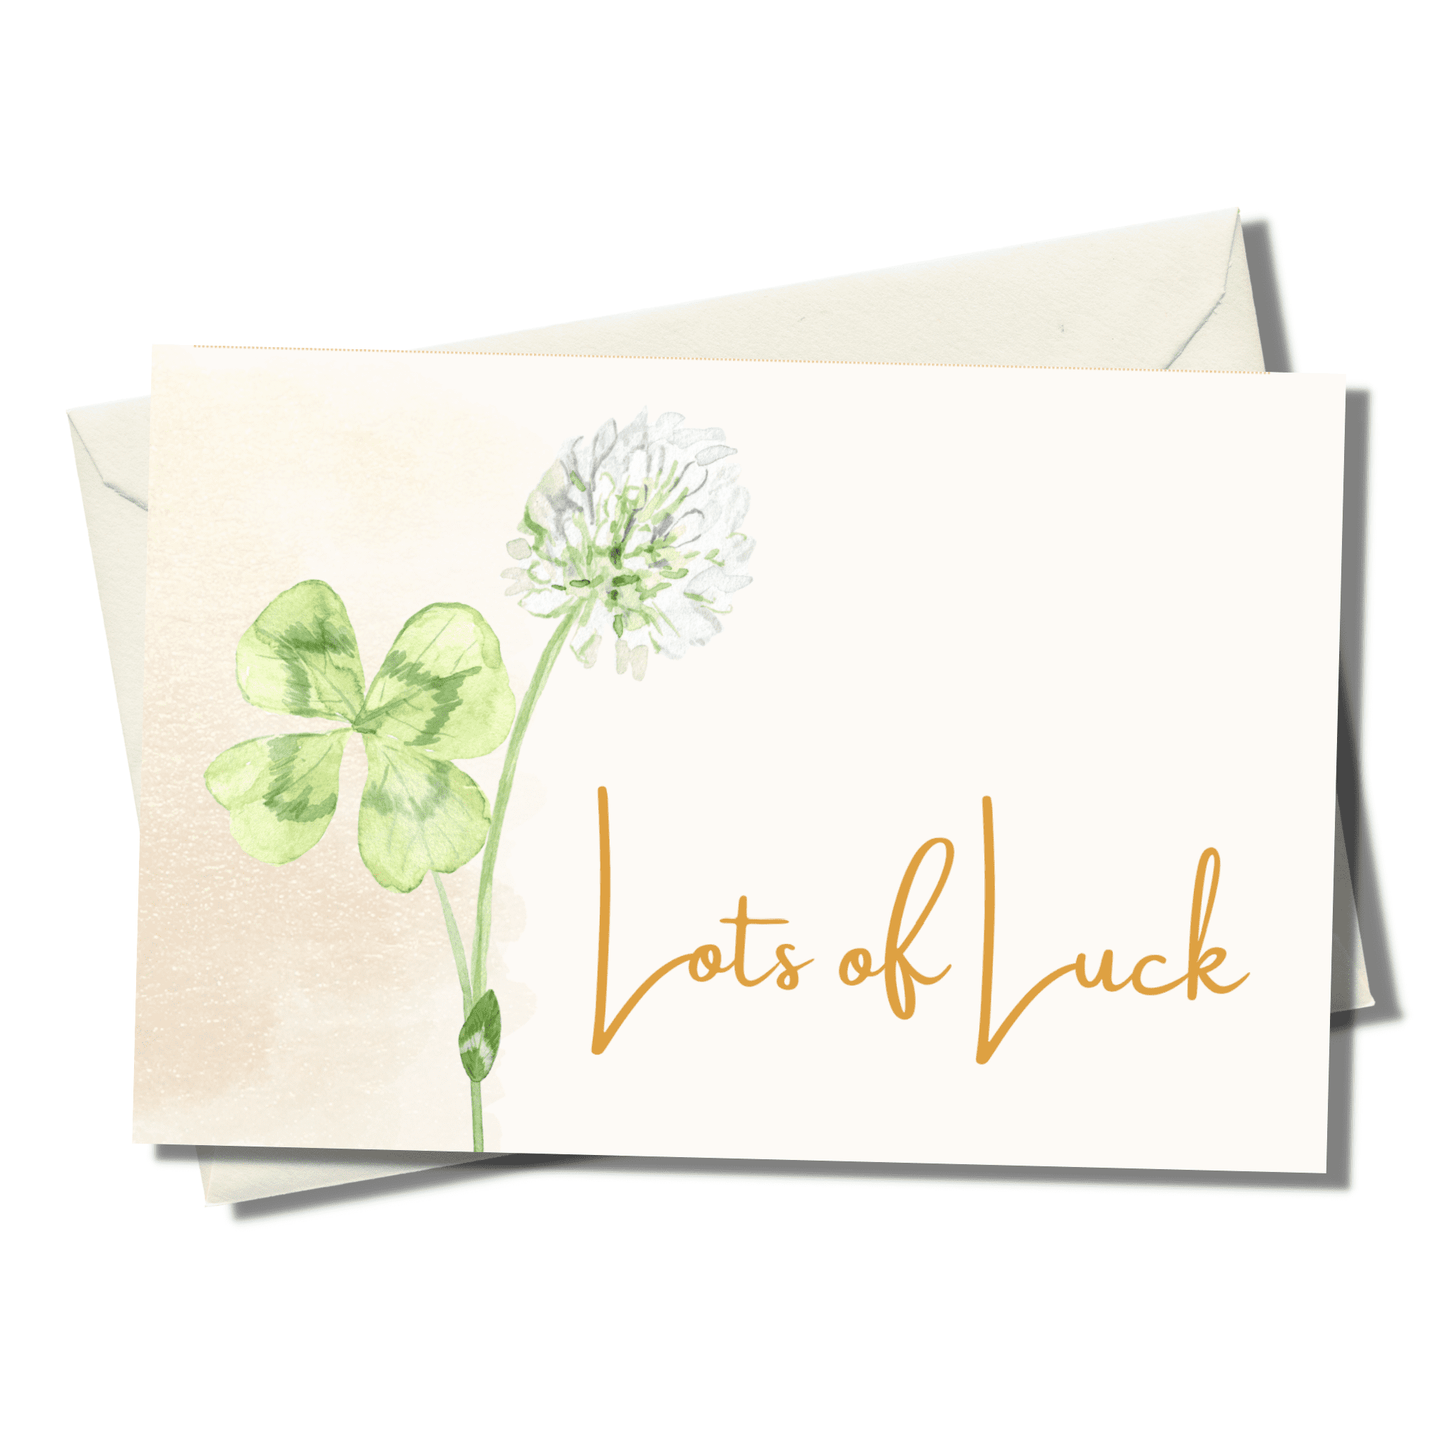 "Lots of Luck!" Personalized Meditation Card